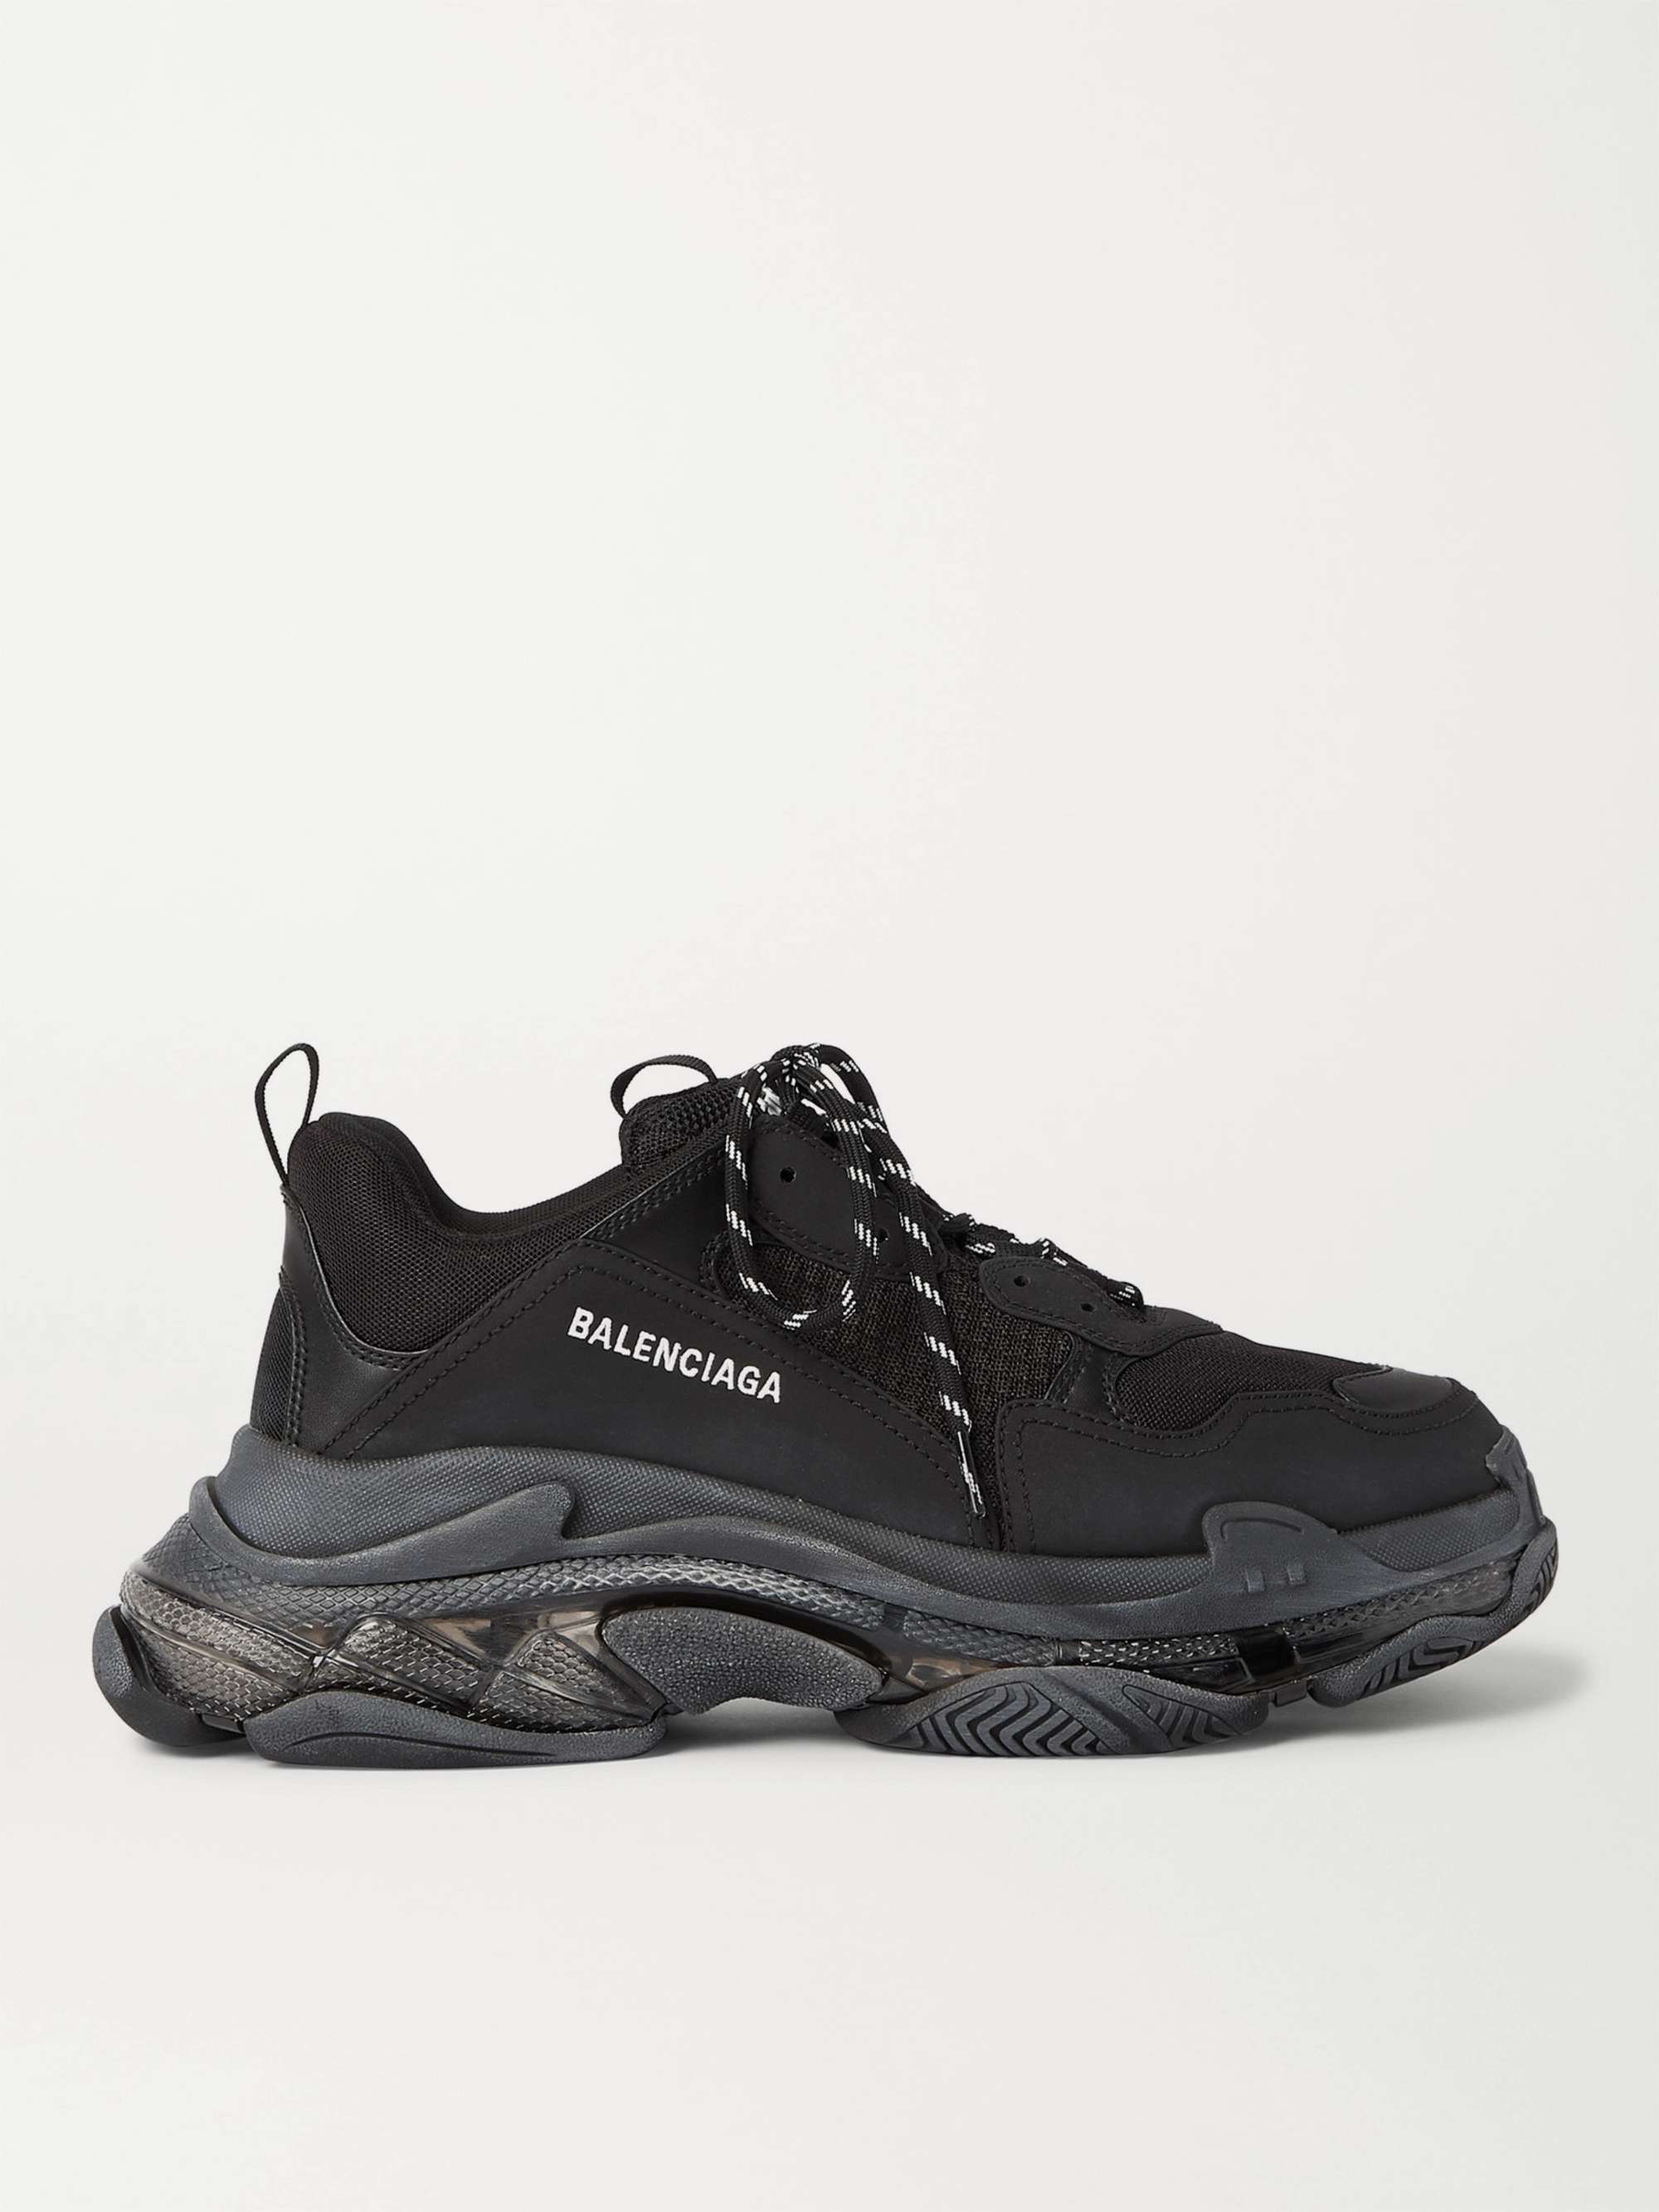 BALENCIAGA Triple S Clear Sole Mesh, Nubuck and Leather Sneakers for Men |  MR PORTER